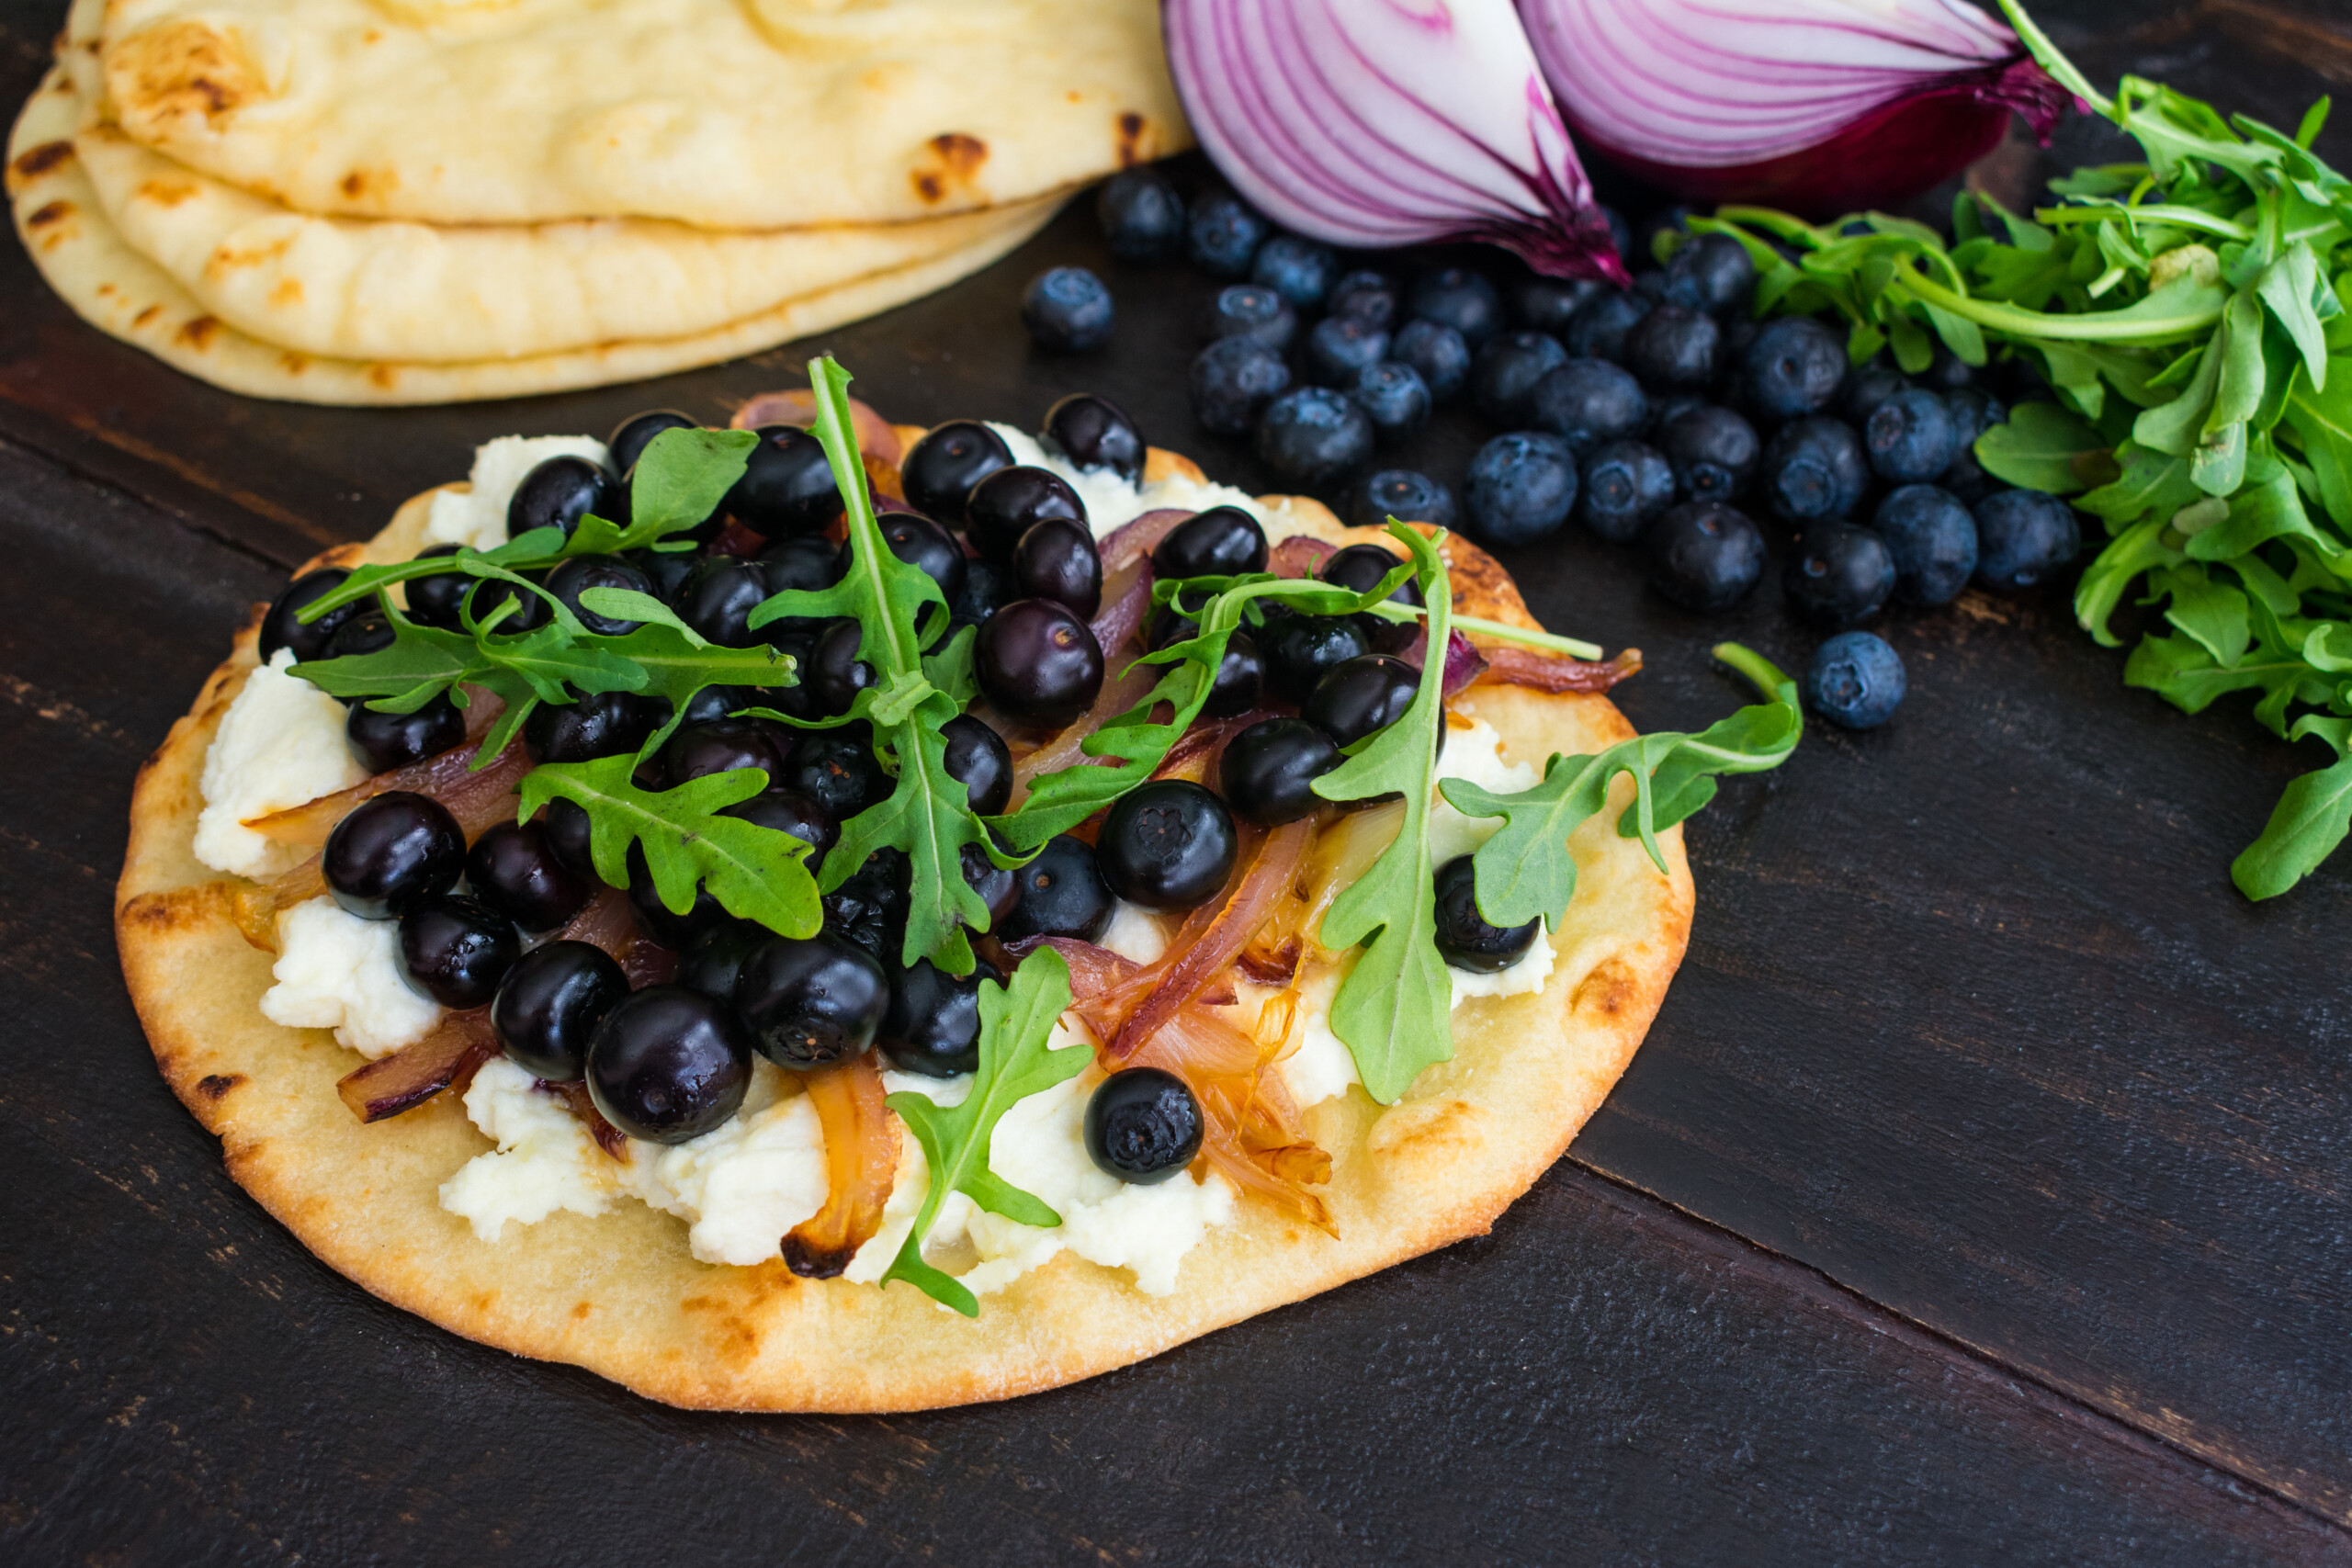 Naan pizza with goat cheese, caramelized onions, blueberries, and arugula.